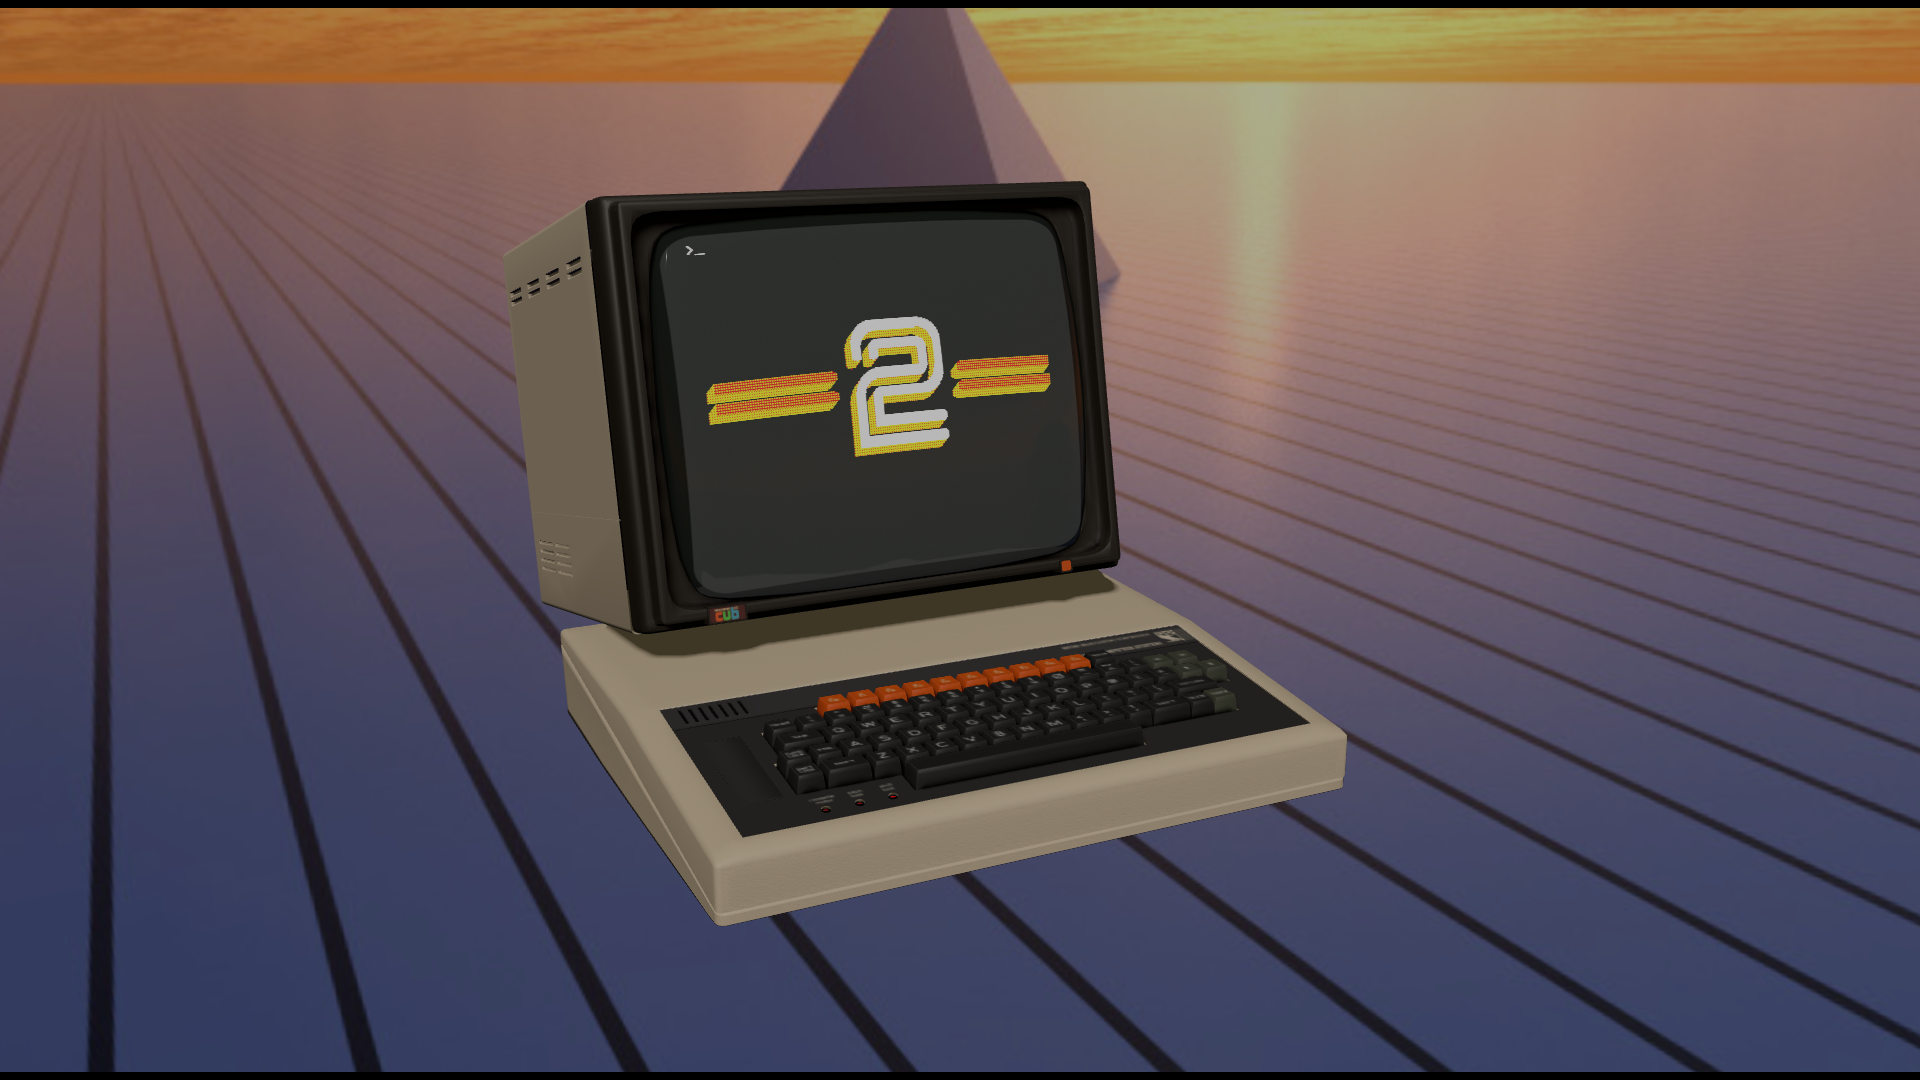 A fully-working CGI 3D Model and emulator of the BBC Microcomputer (VirtualBeeb). It is running a BBC Basic program that draws the 1979 BBC2 logo.